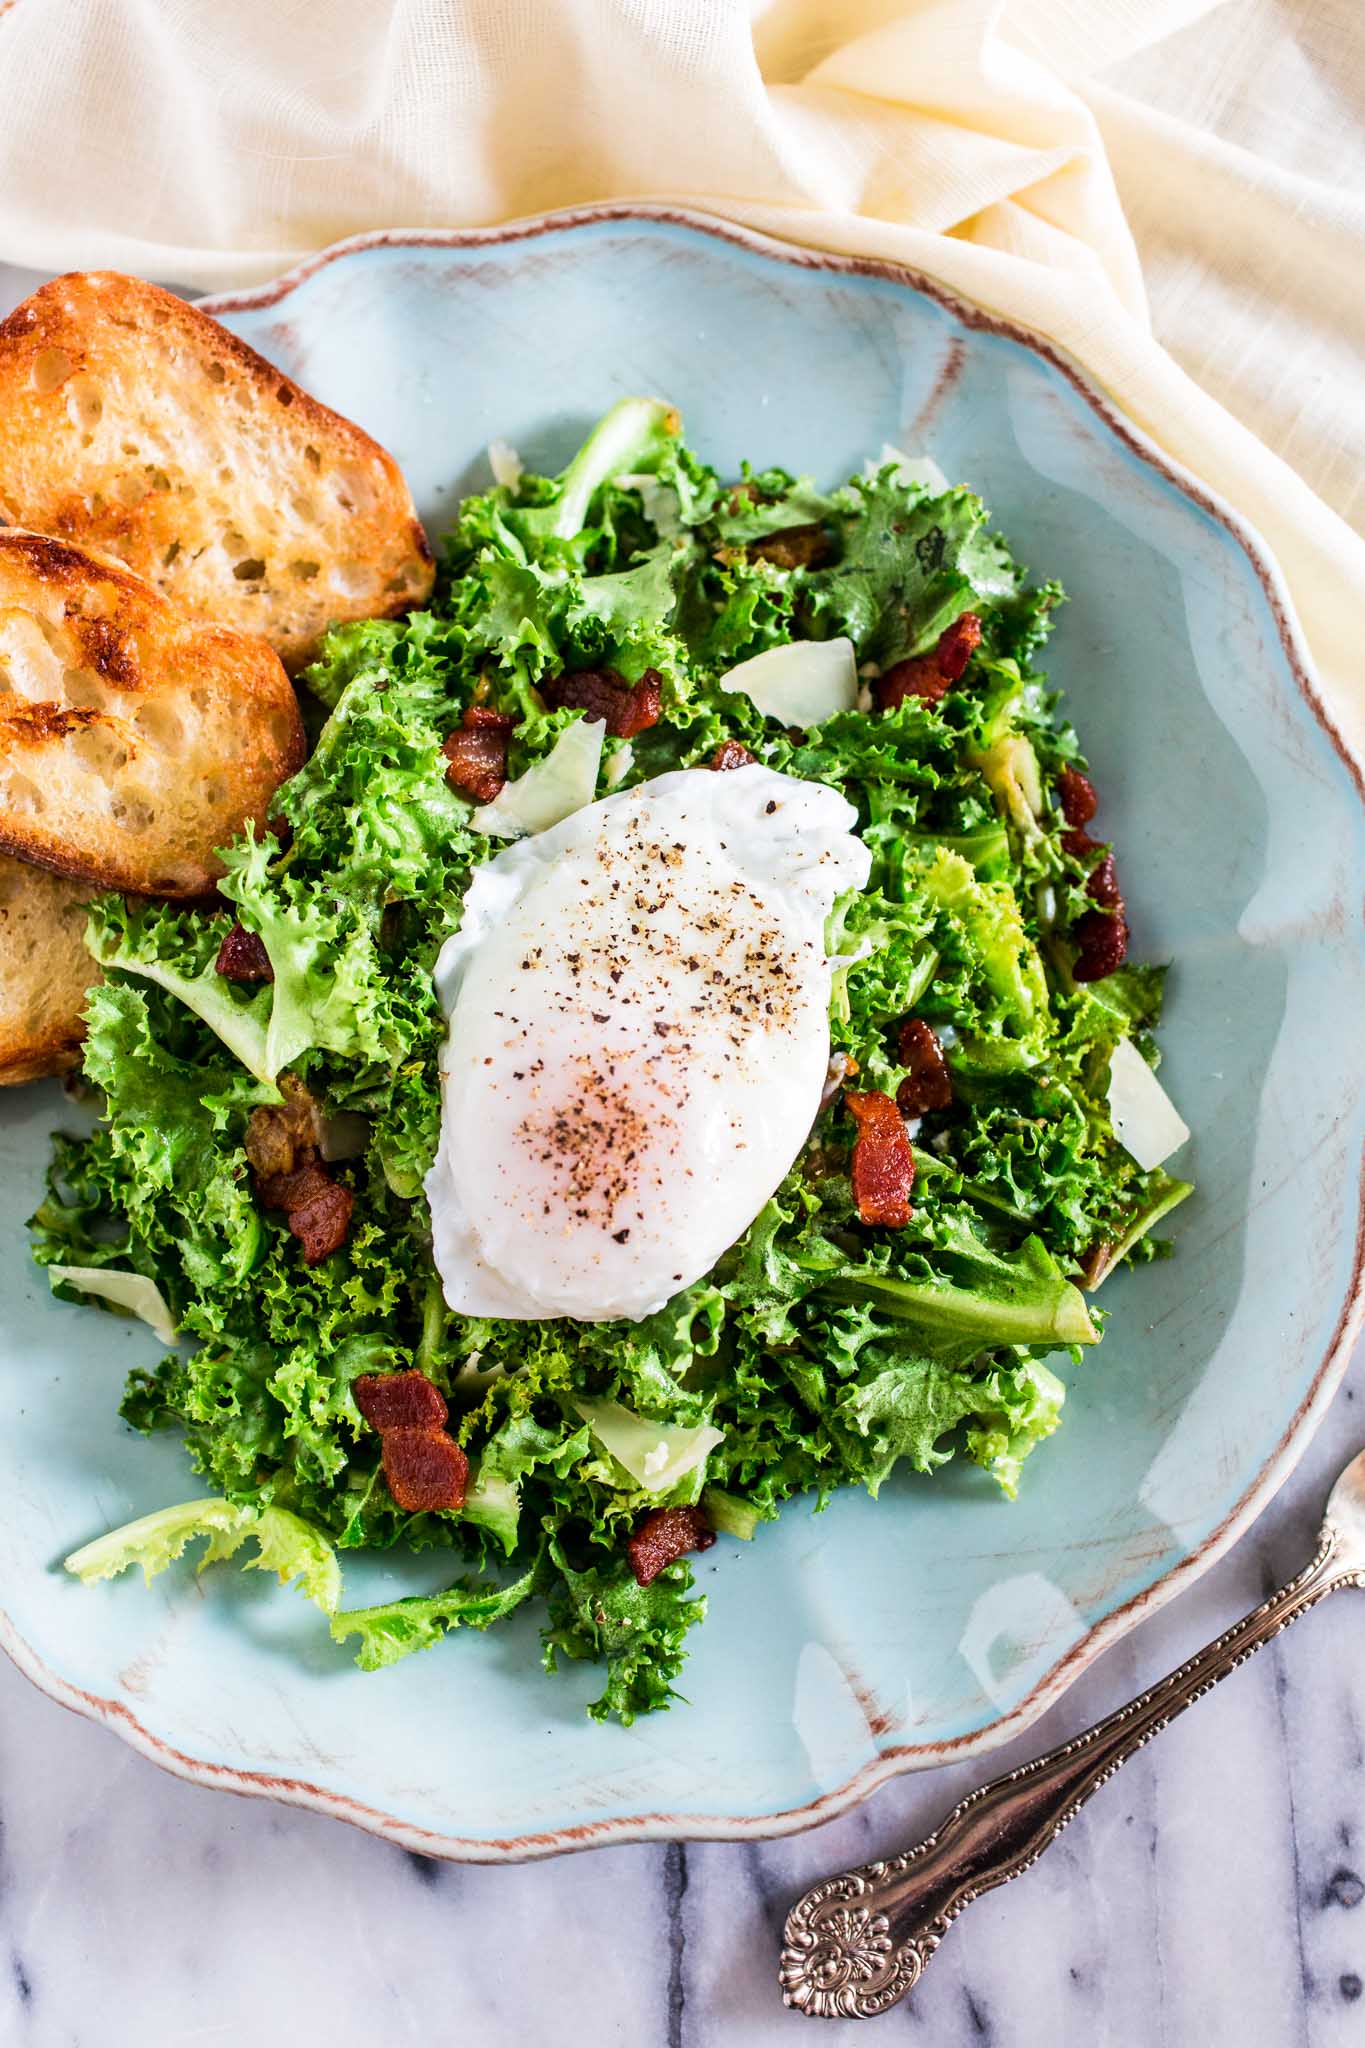 Lyonnaise Salad | www.oliviascuisine.com | This classic French salad, from Lyon, is made with frisée lettuce, bacon, a delicious shallot mustard vinaigrette and a poached egg.